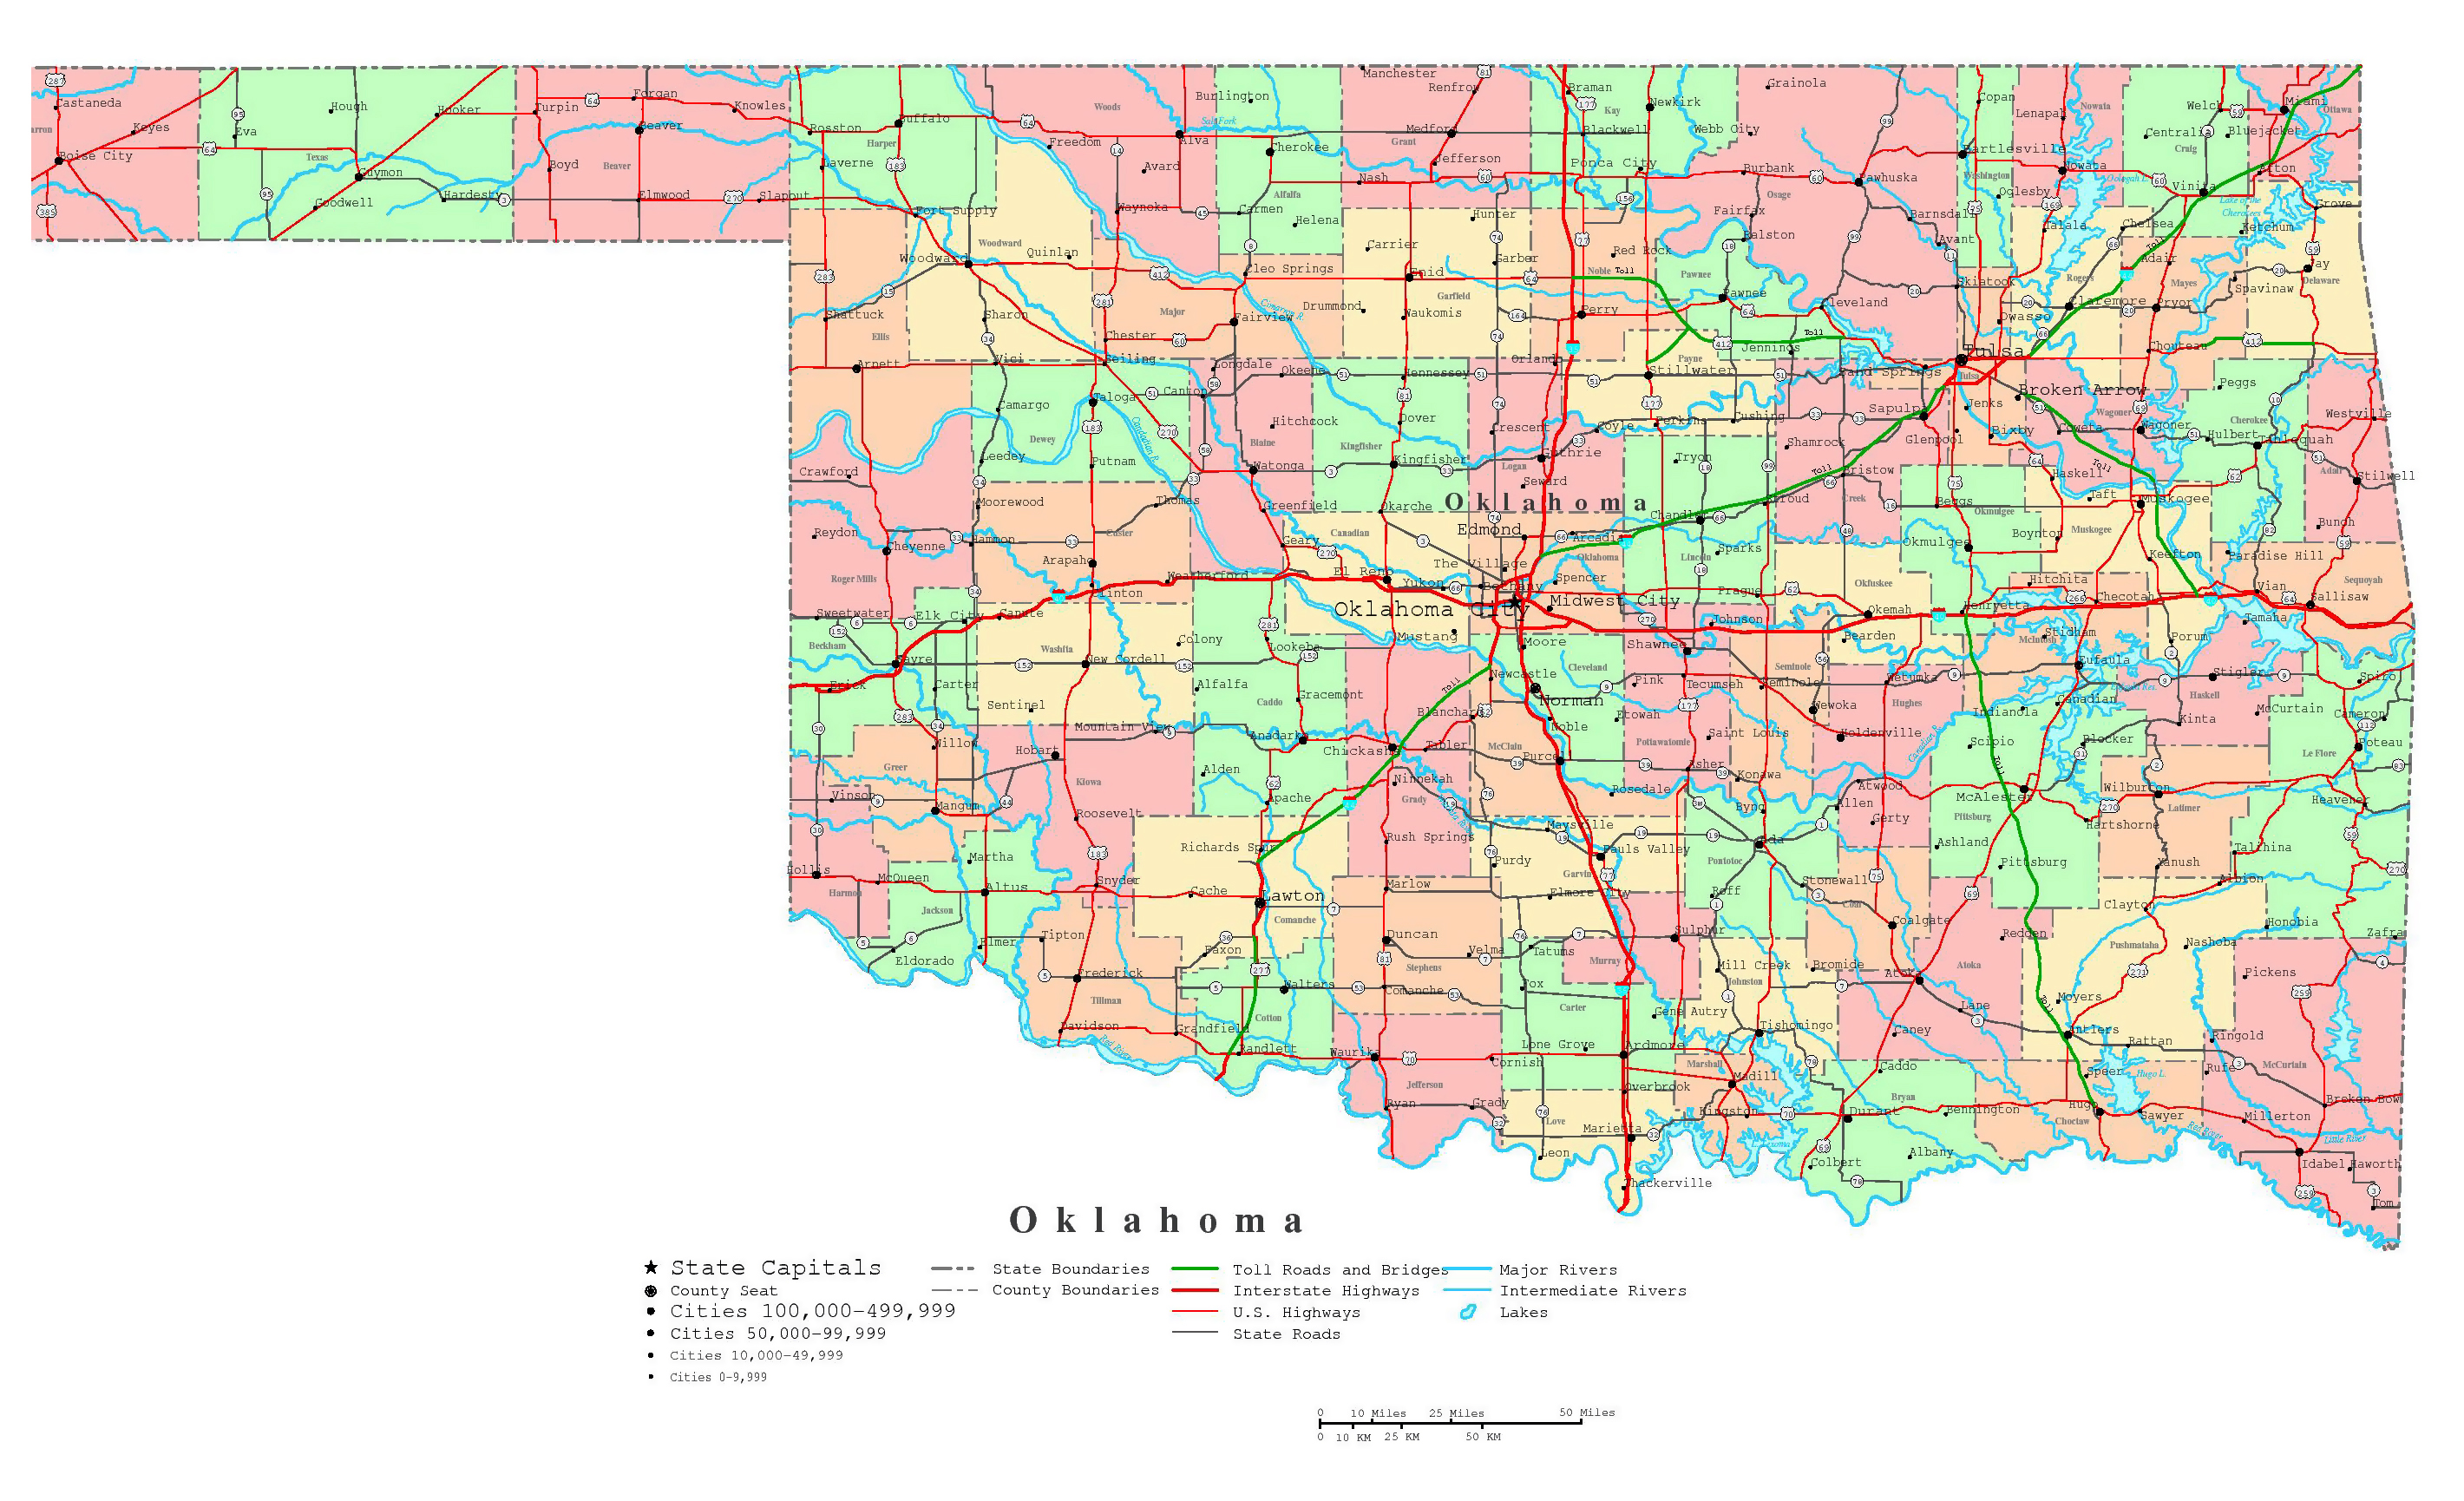 Large Detailed Administrative Map Of Oklahoma State With Roads Highways And Cities 